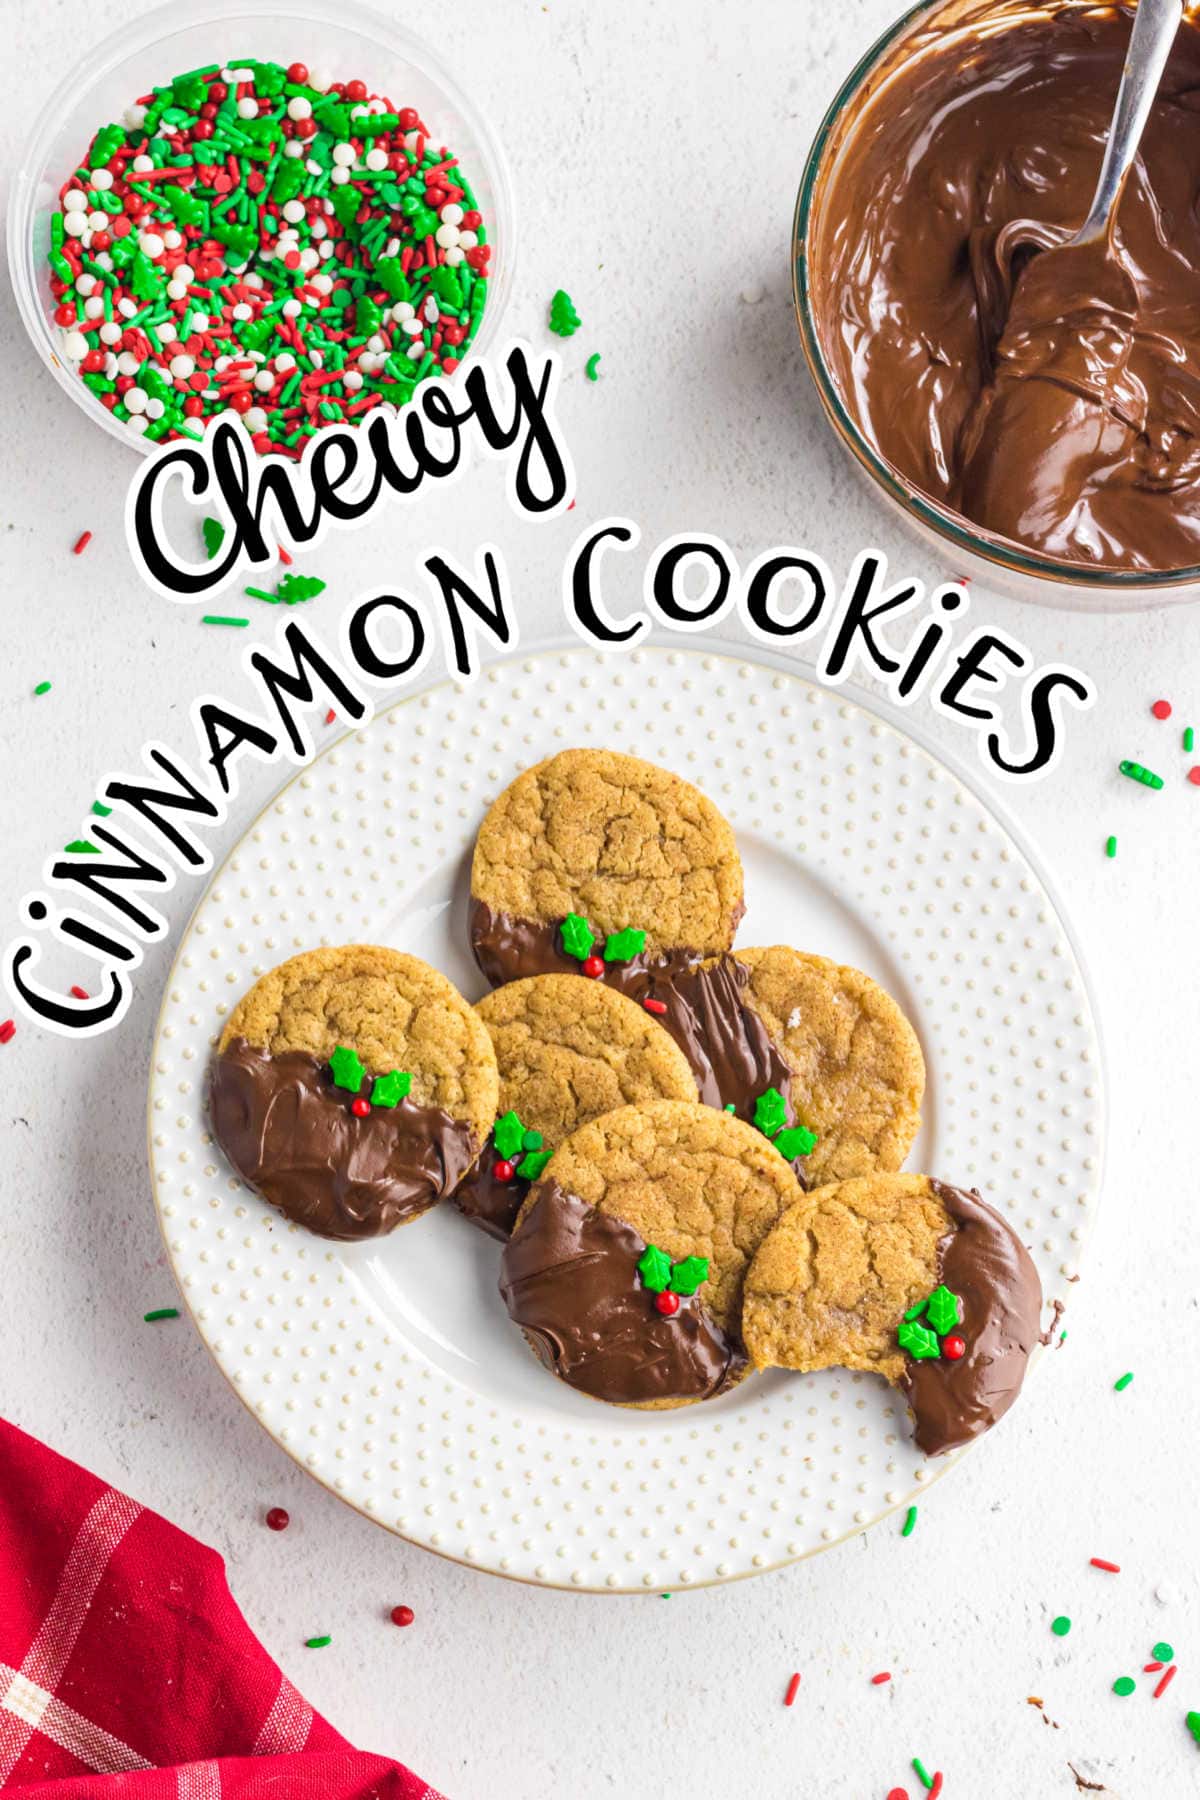 Title image. Overhead view of the cookies on a plate with text overlay.